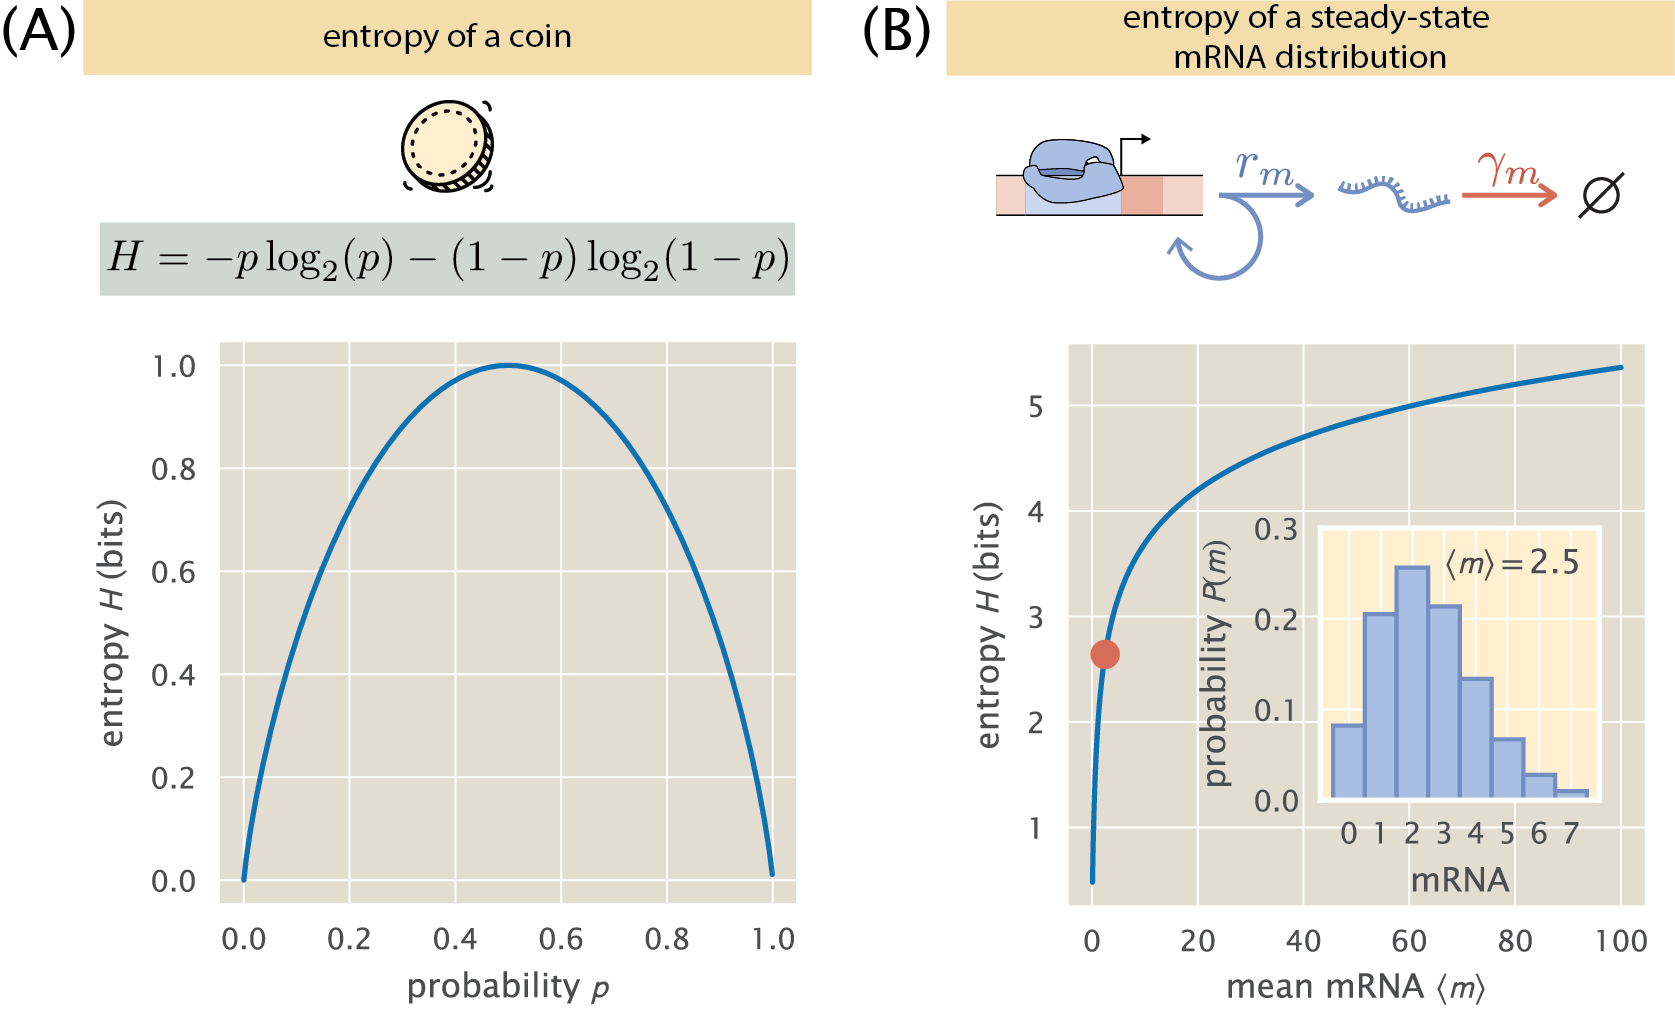 Figure 10: Shannon entropy in action. (A) The entropy of a coin as a function of the probability of heads p. The entropy is maximum when the coin is fair, i.e., p=0.5, meaning that this is the most unpredictable coin one could have. (B) The entropy of the steady-state mRNA distribution as derived in Eq. \ref{eq:mRNA_steady} as a function of the mean mRNA copy number. The point shows the entropy of the distribution shown in the inset. Bot figures use base 2 for the logarithm, resulting in units of bits for the entropy. The Python code (ch1_fig10.py) used to generate this figure can be found on the thesis GitHub repository.